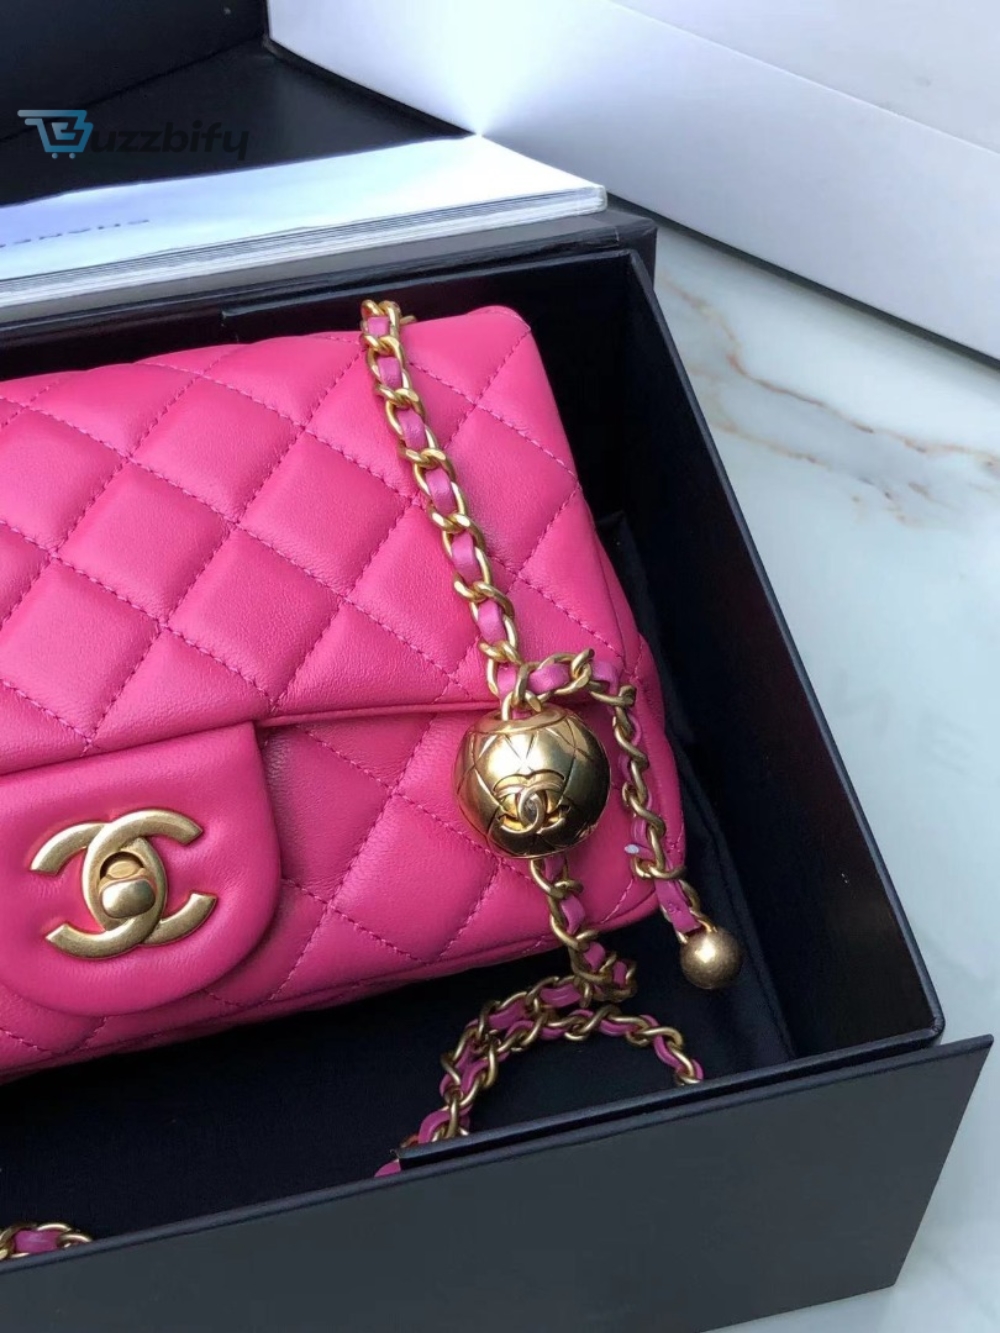 Chanel Flap Bag With CC Ball On Strap Pink For Women, Women’s Handbags, Shoulder And Crossbody Bags 7.8in/20cm AS1787
